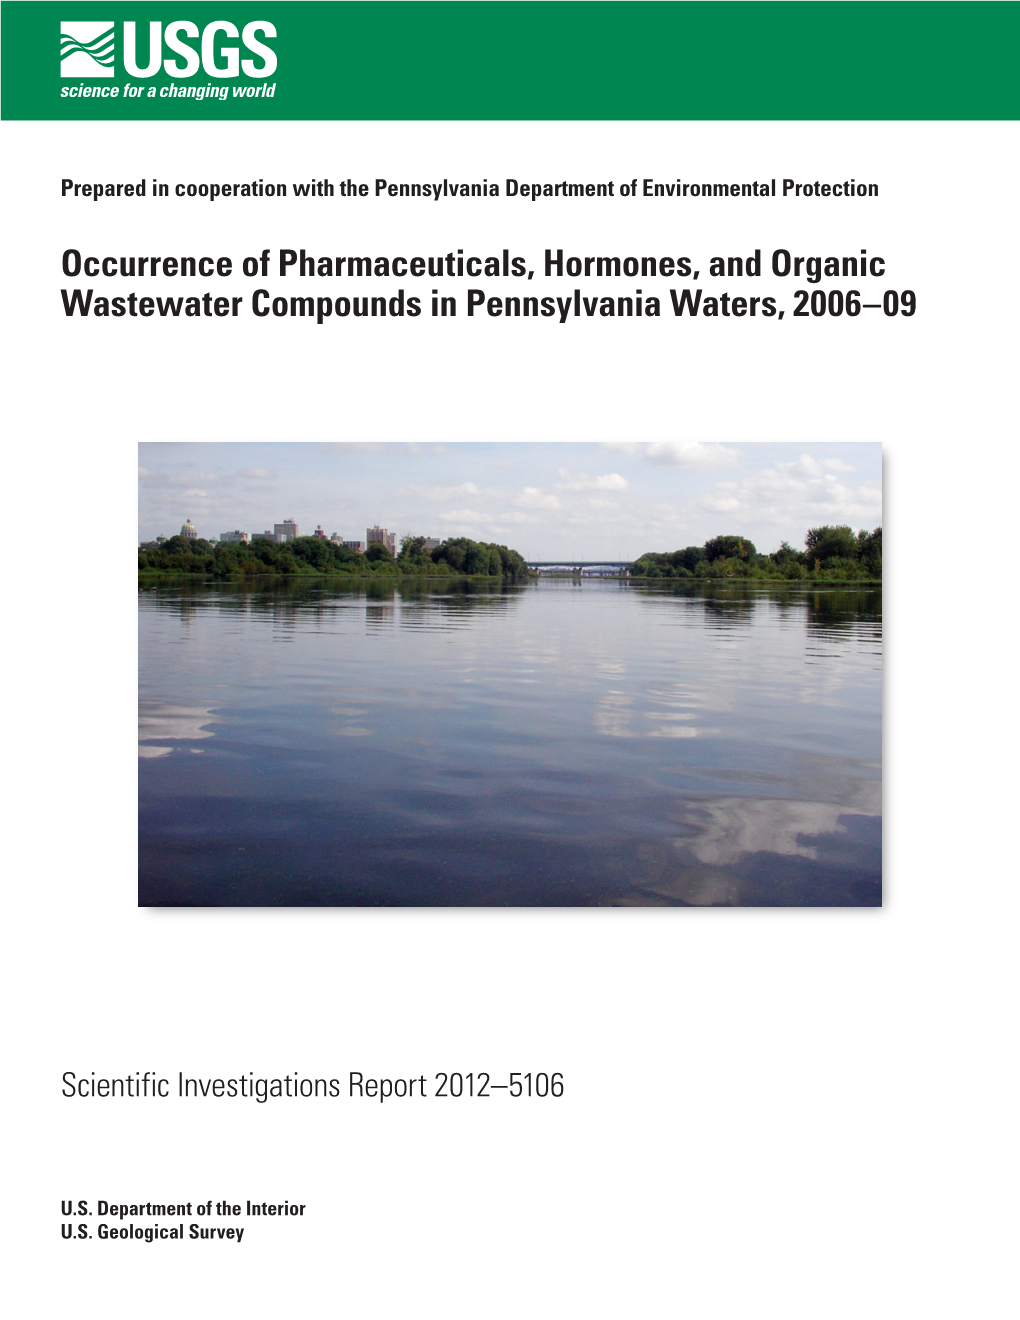 Occurrence of Pharmaceuticals, Hormones, and Organic Wastewater Compounds in Pennsylvania Waters, 2006–09